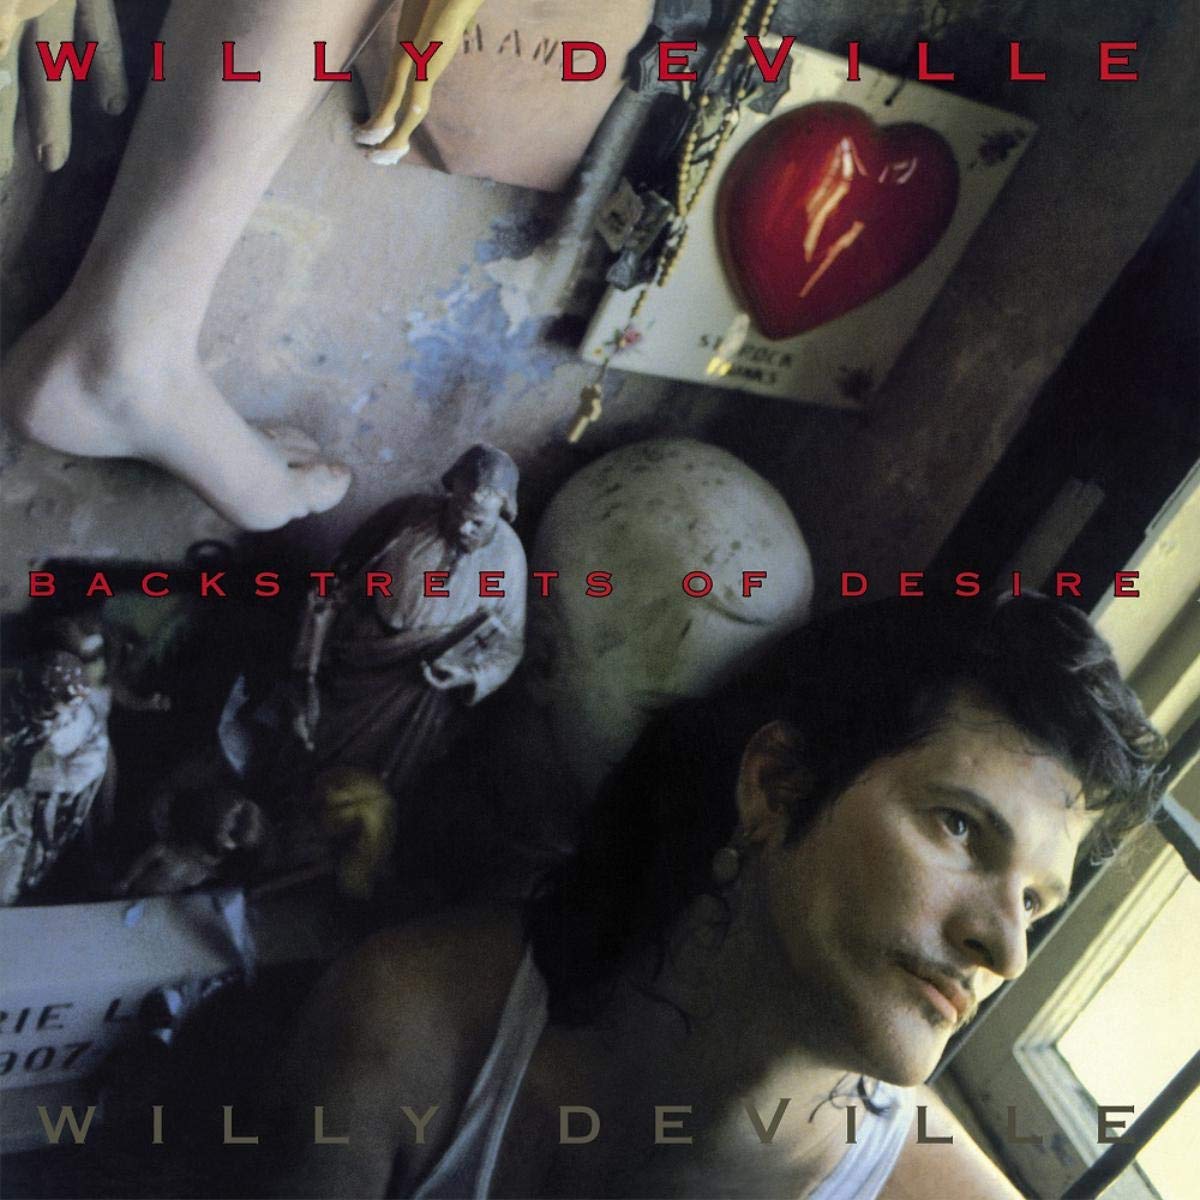 DEVILLE, WILLY - BACKSTREETS OF DESIRE - LP